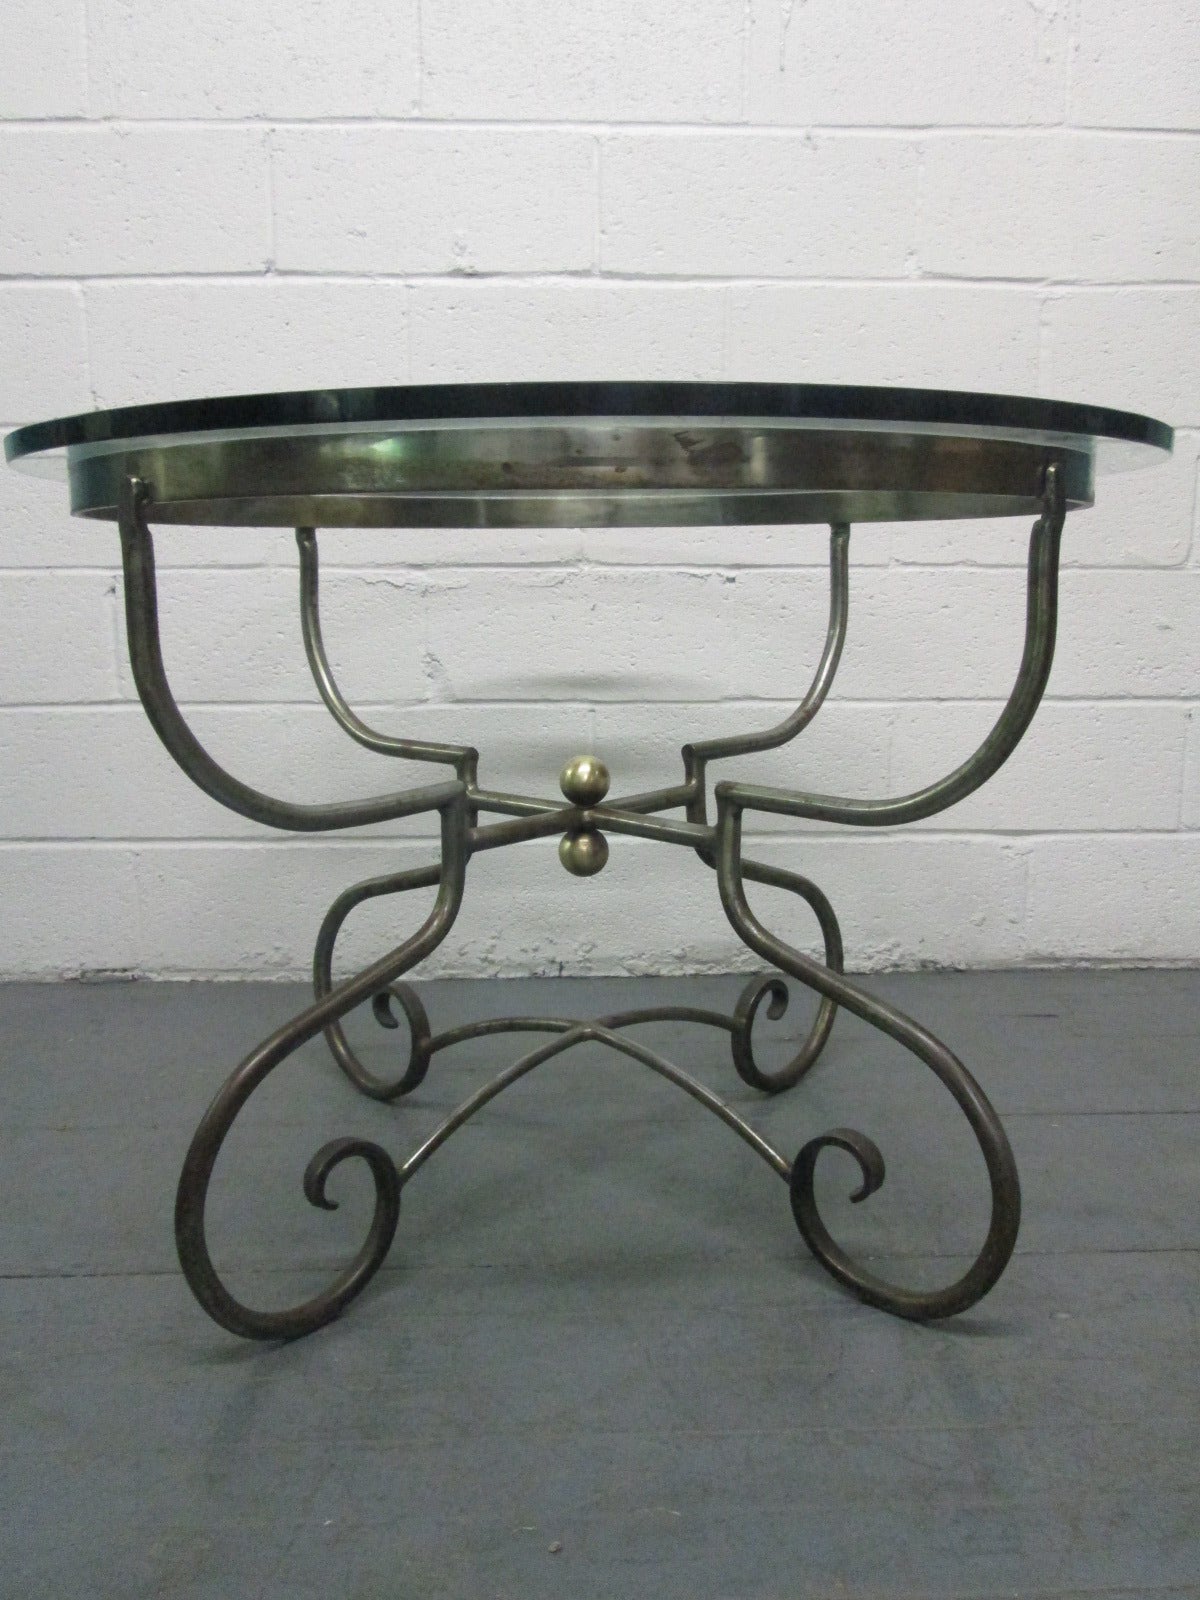 Italian wrought iron center table. Has round bronze accents. Gueridon table, occasional table.